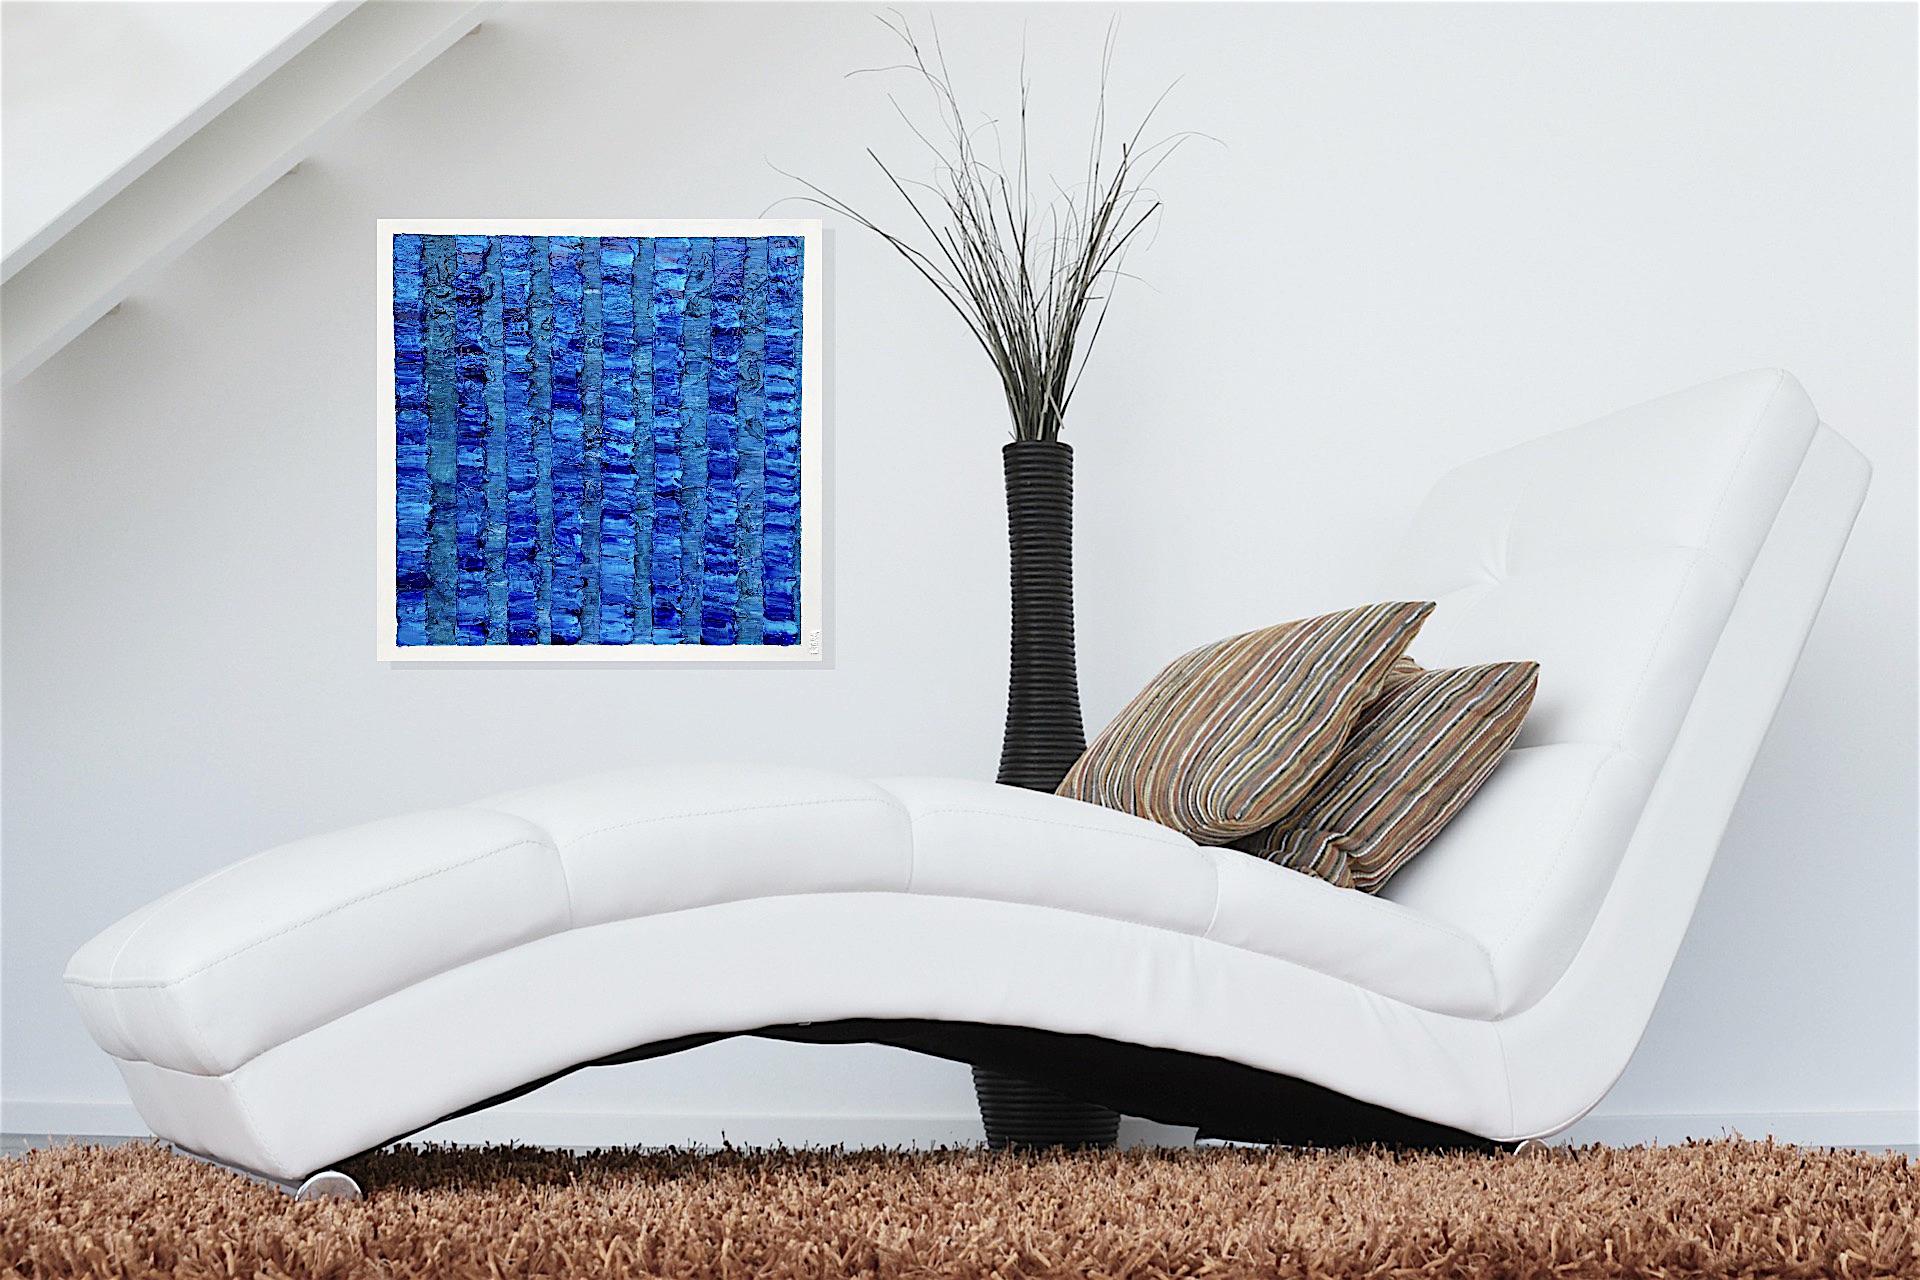 British Painting Marina 9 by Liora Textured Square Blue Abstract Canvas Contemporary  For Sale